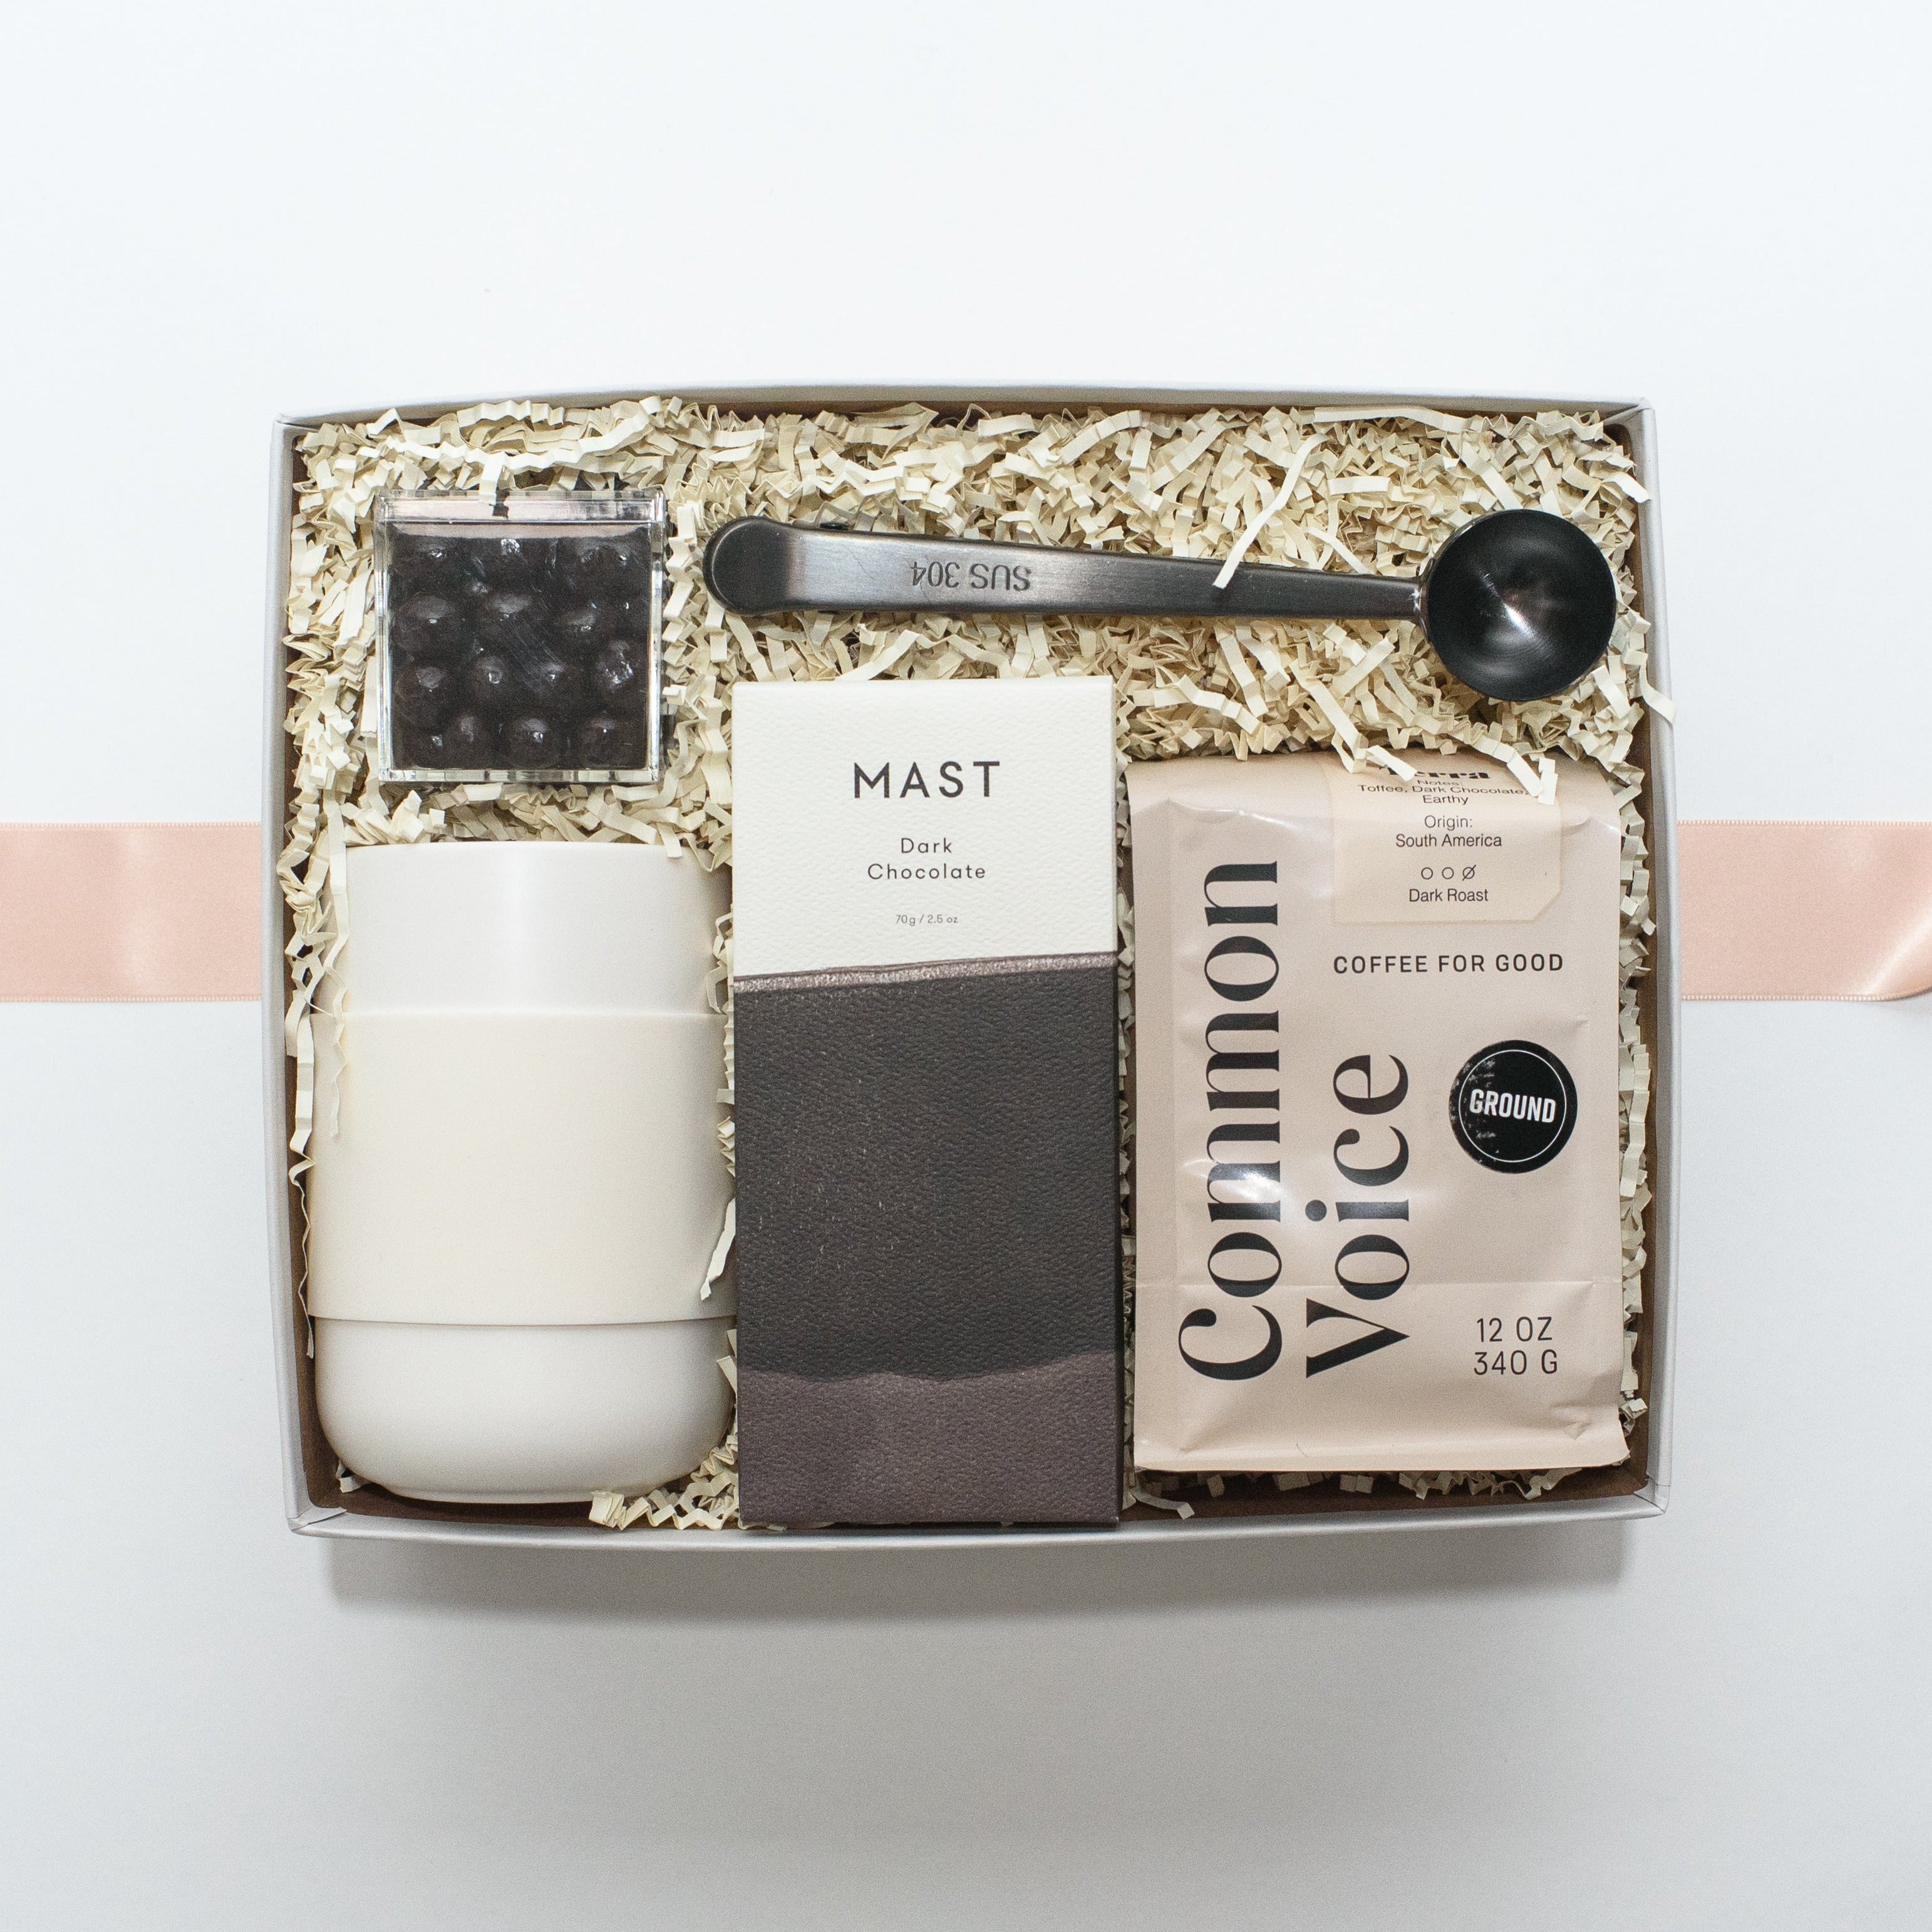 Poori Boxes - Exclusive collection of gifts by Wedtree